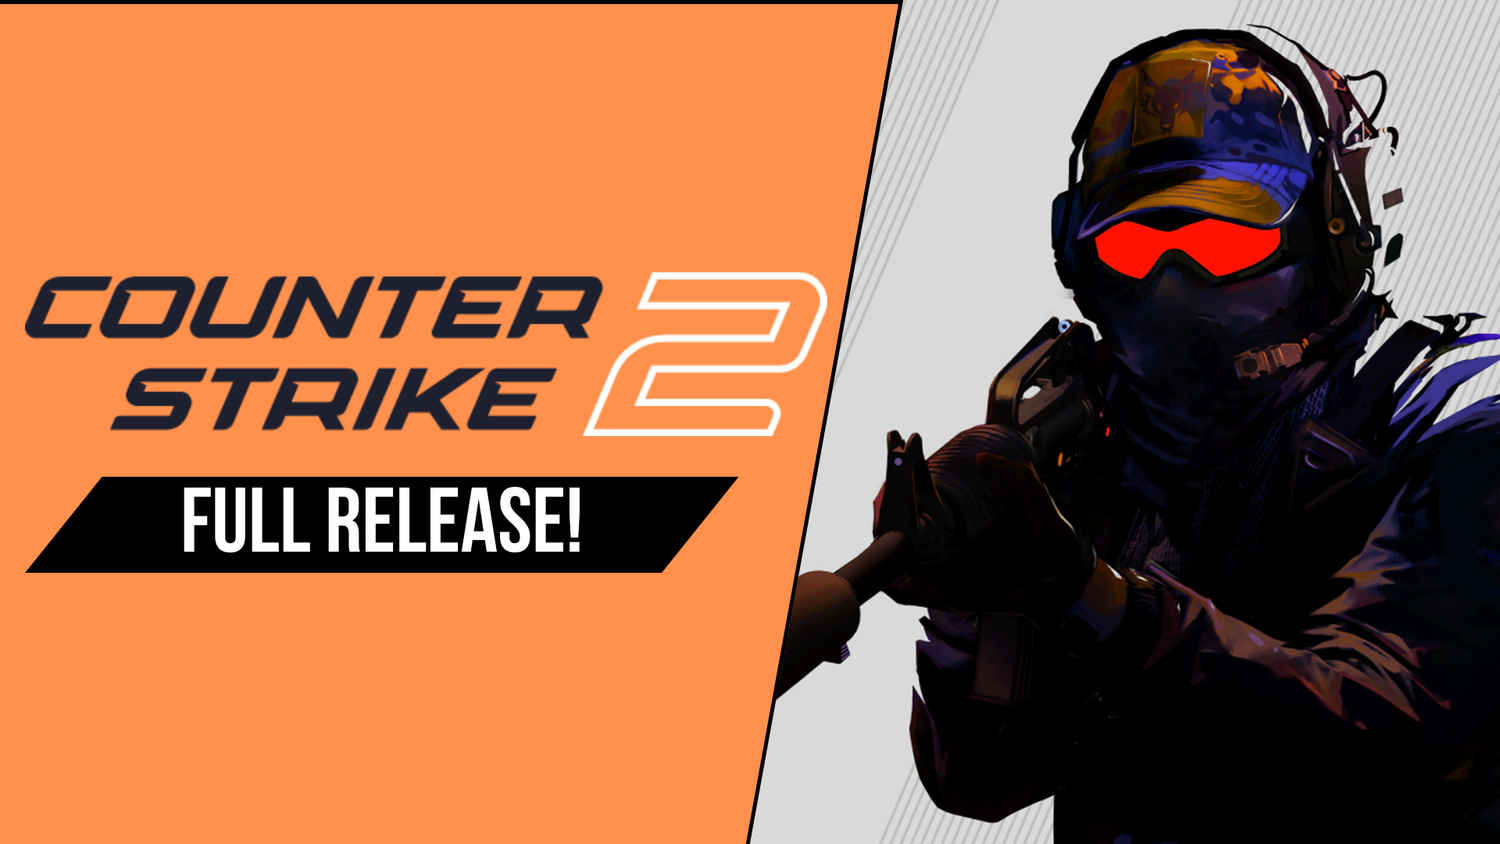 Did you notice this about the Counter-Strike 2 logo?